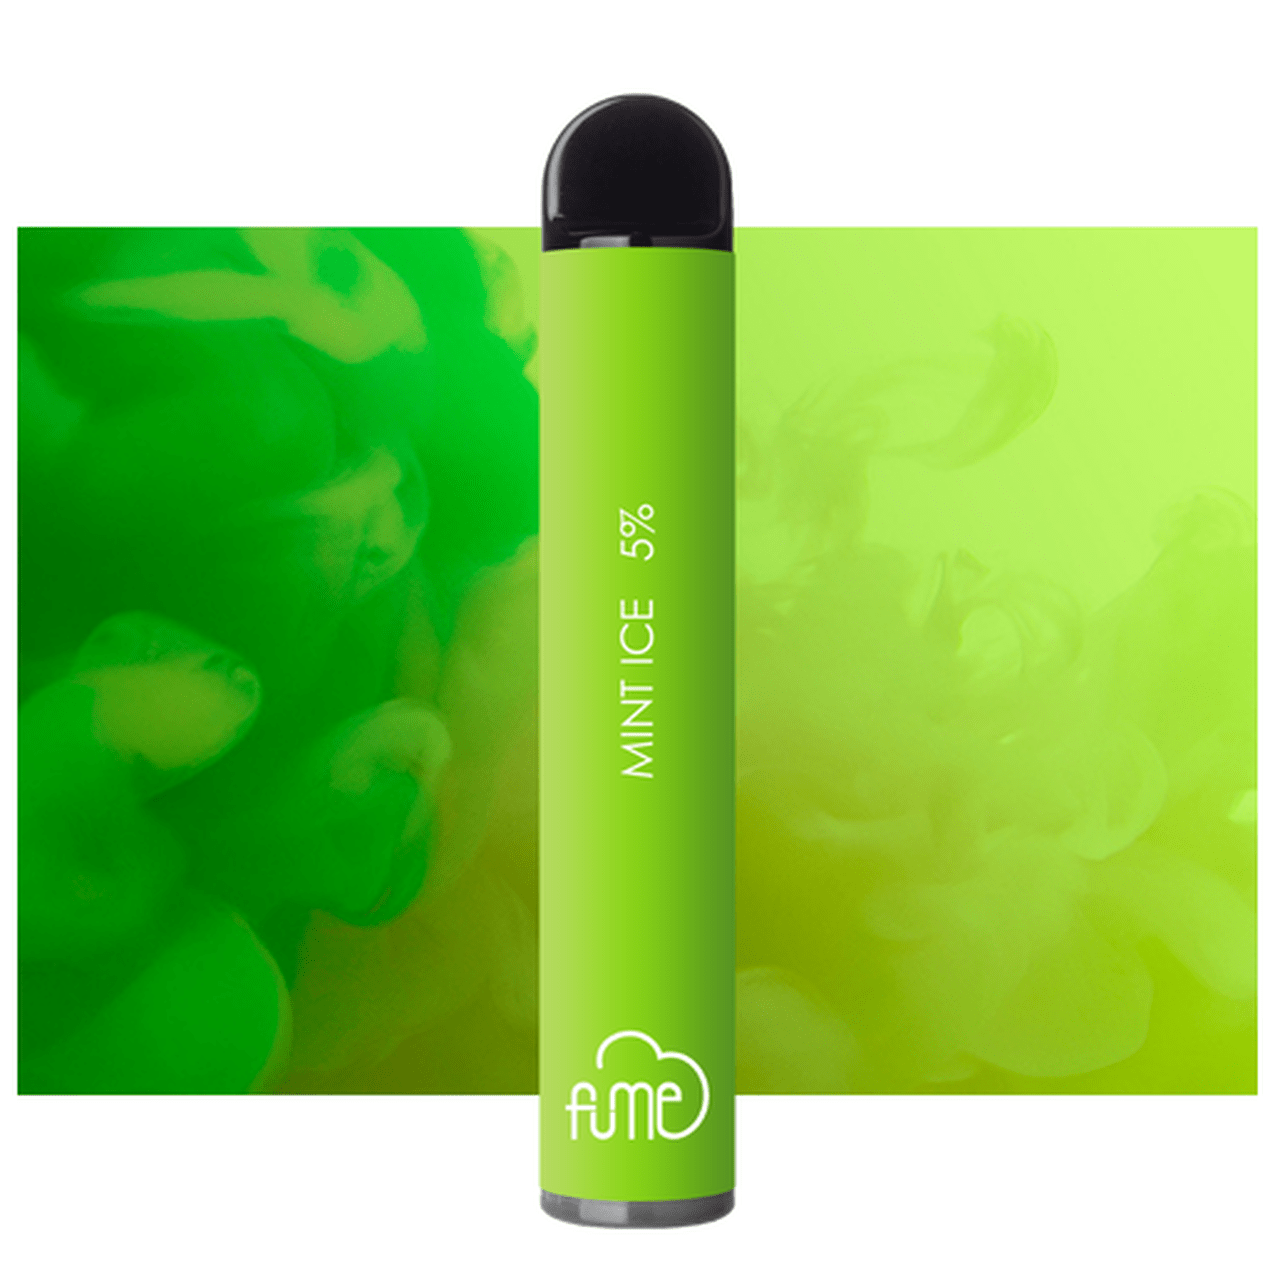 FUME ULTRA MINT ICE 5% - 2500 PUFFS | PRICE POINT NY